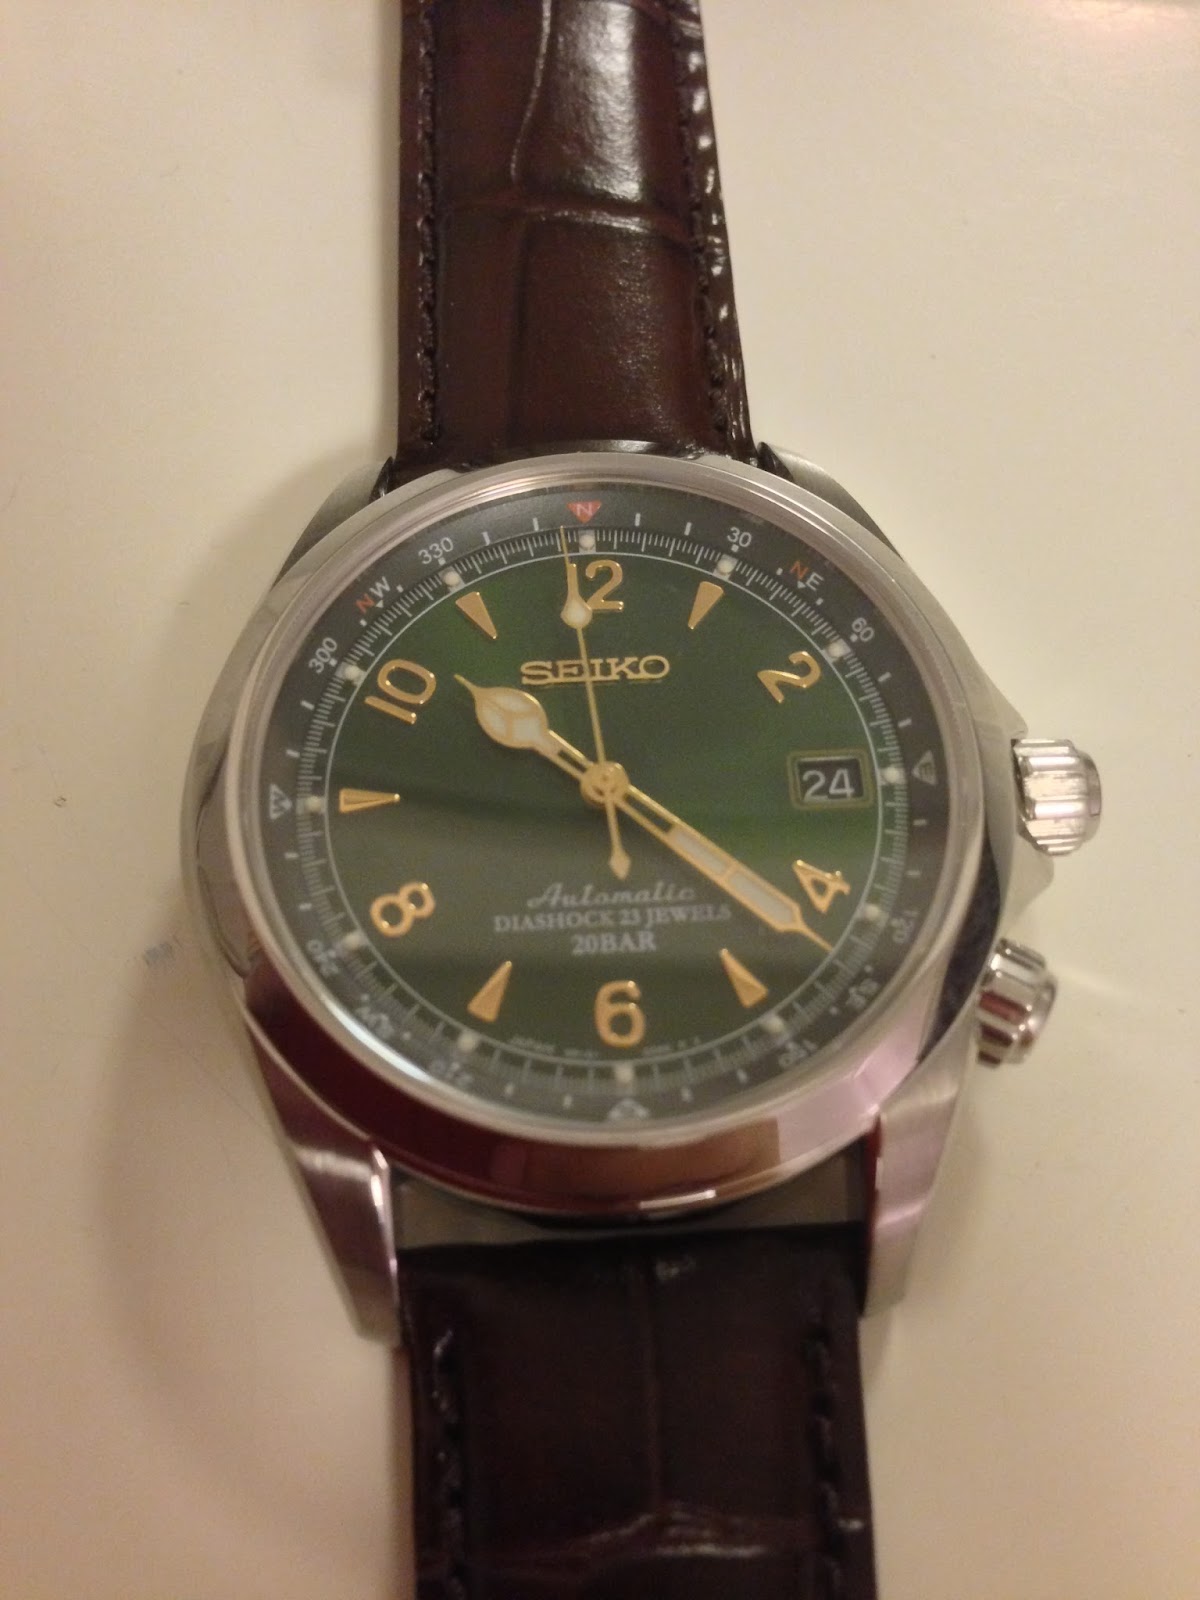 My Eastern Watch Collection: Seiko SARB017 Alpinist – A Very Refined ...